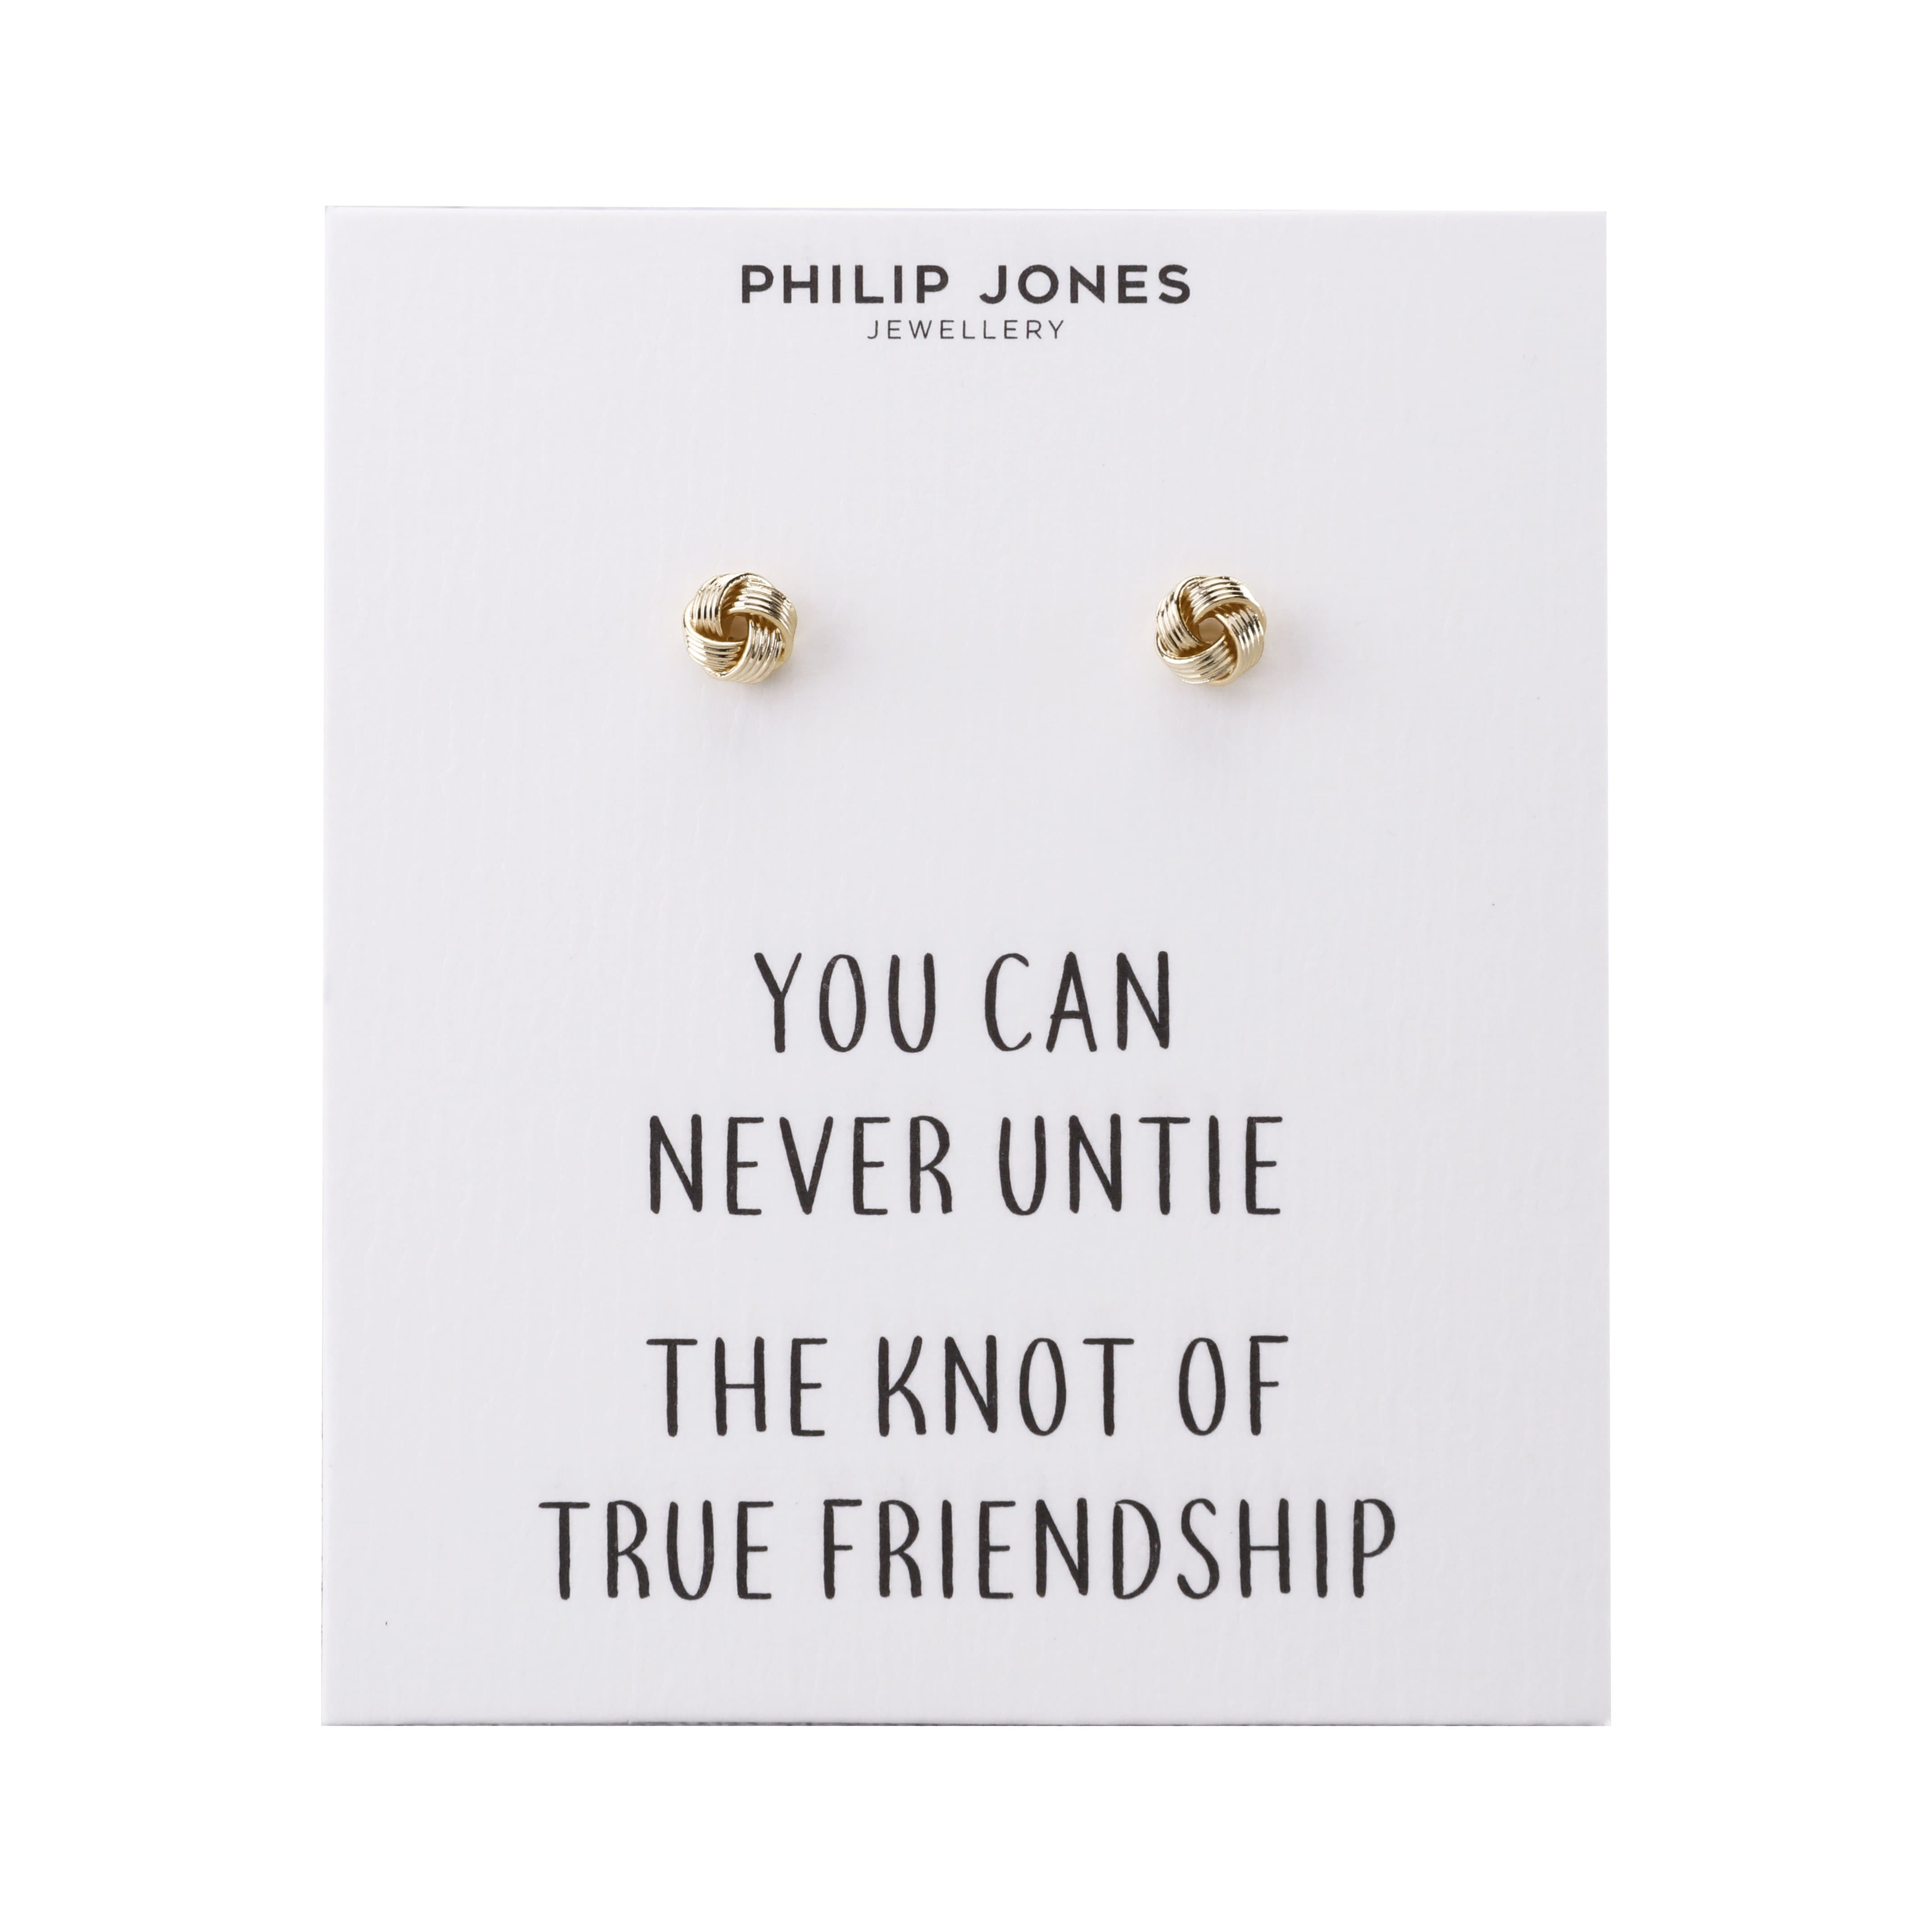 Gold Plated Love Knot Earrings with Quote Card by Philip Jones Jewellery